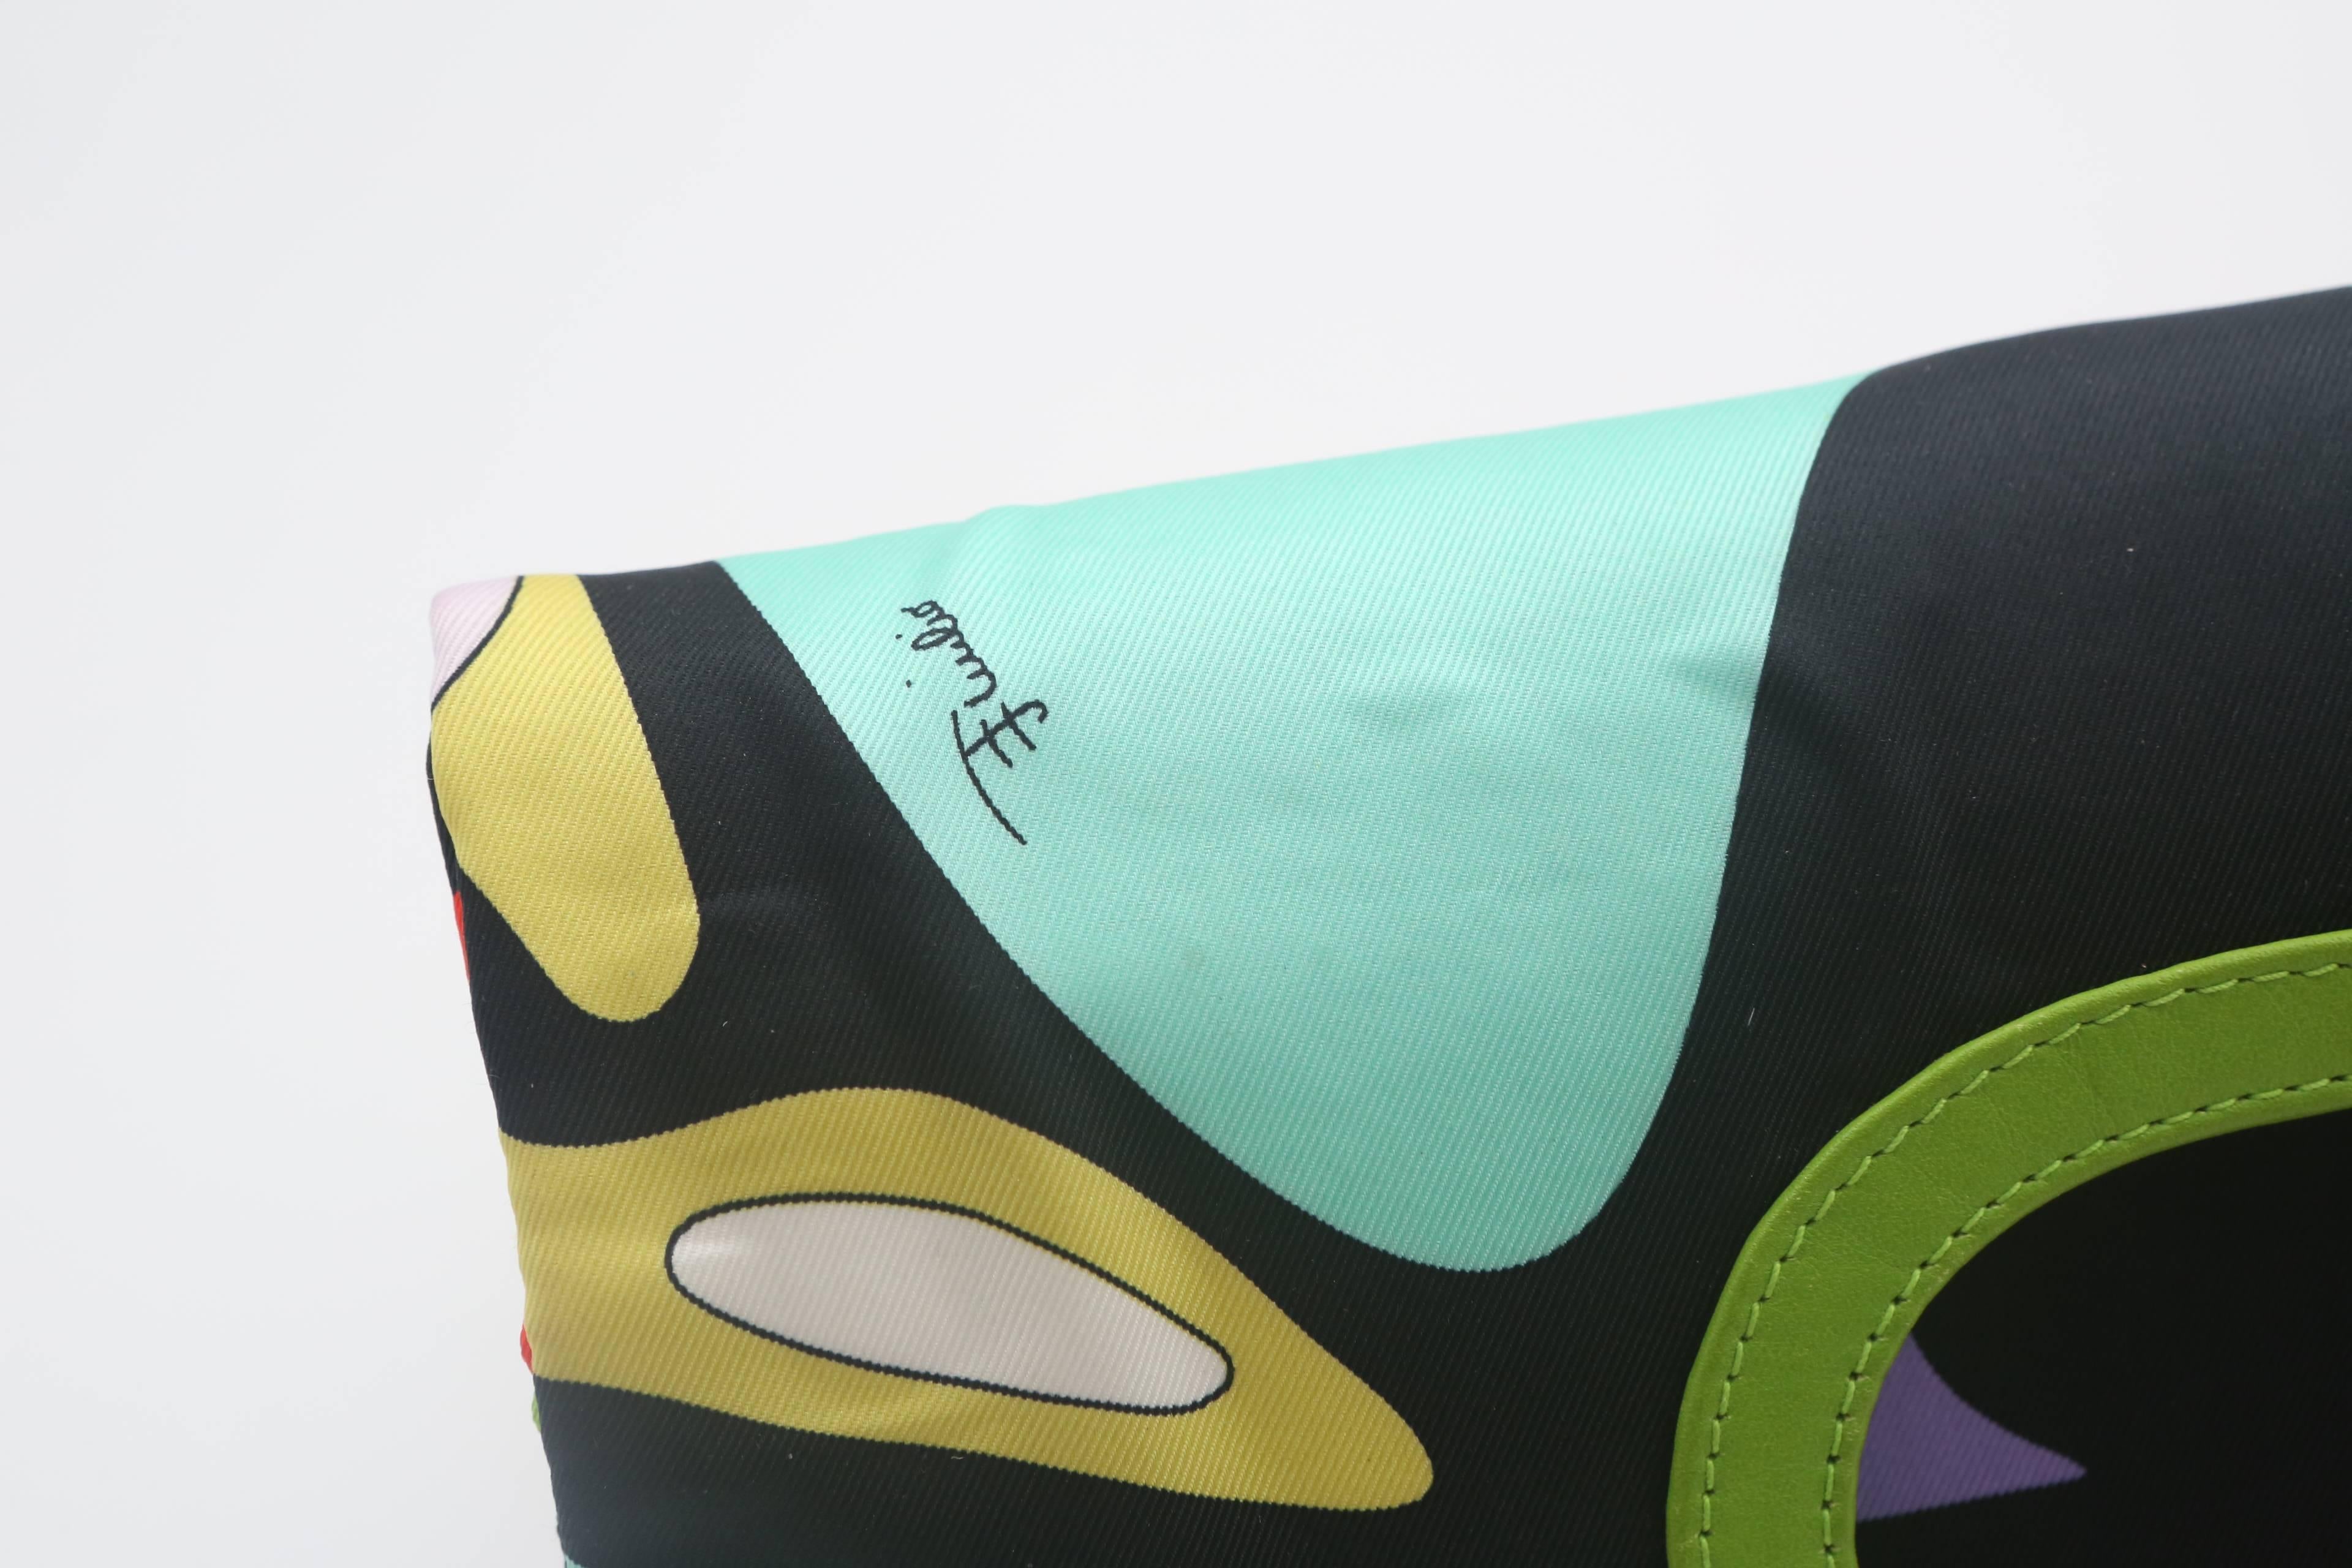 Emilio Pucci multi colored, signature printed, foldover clutch w/ green leather detail on handle & inside.  